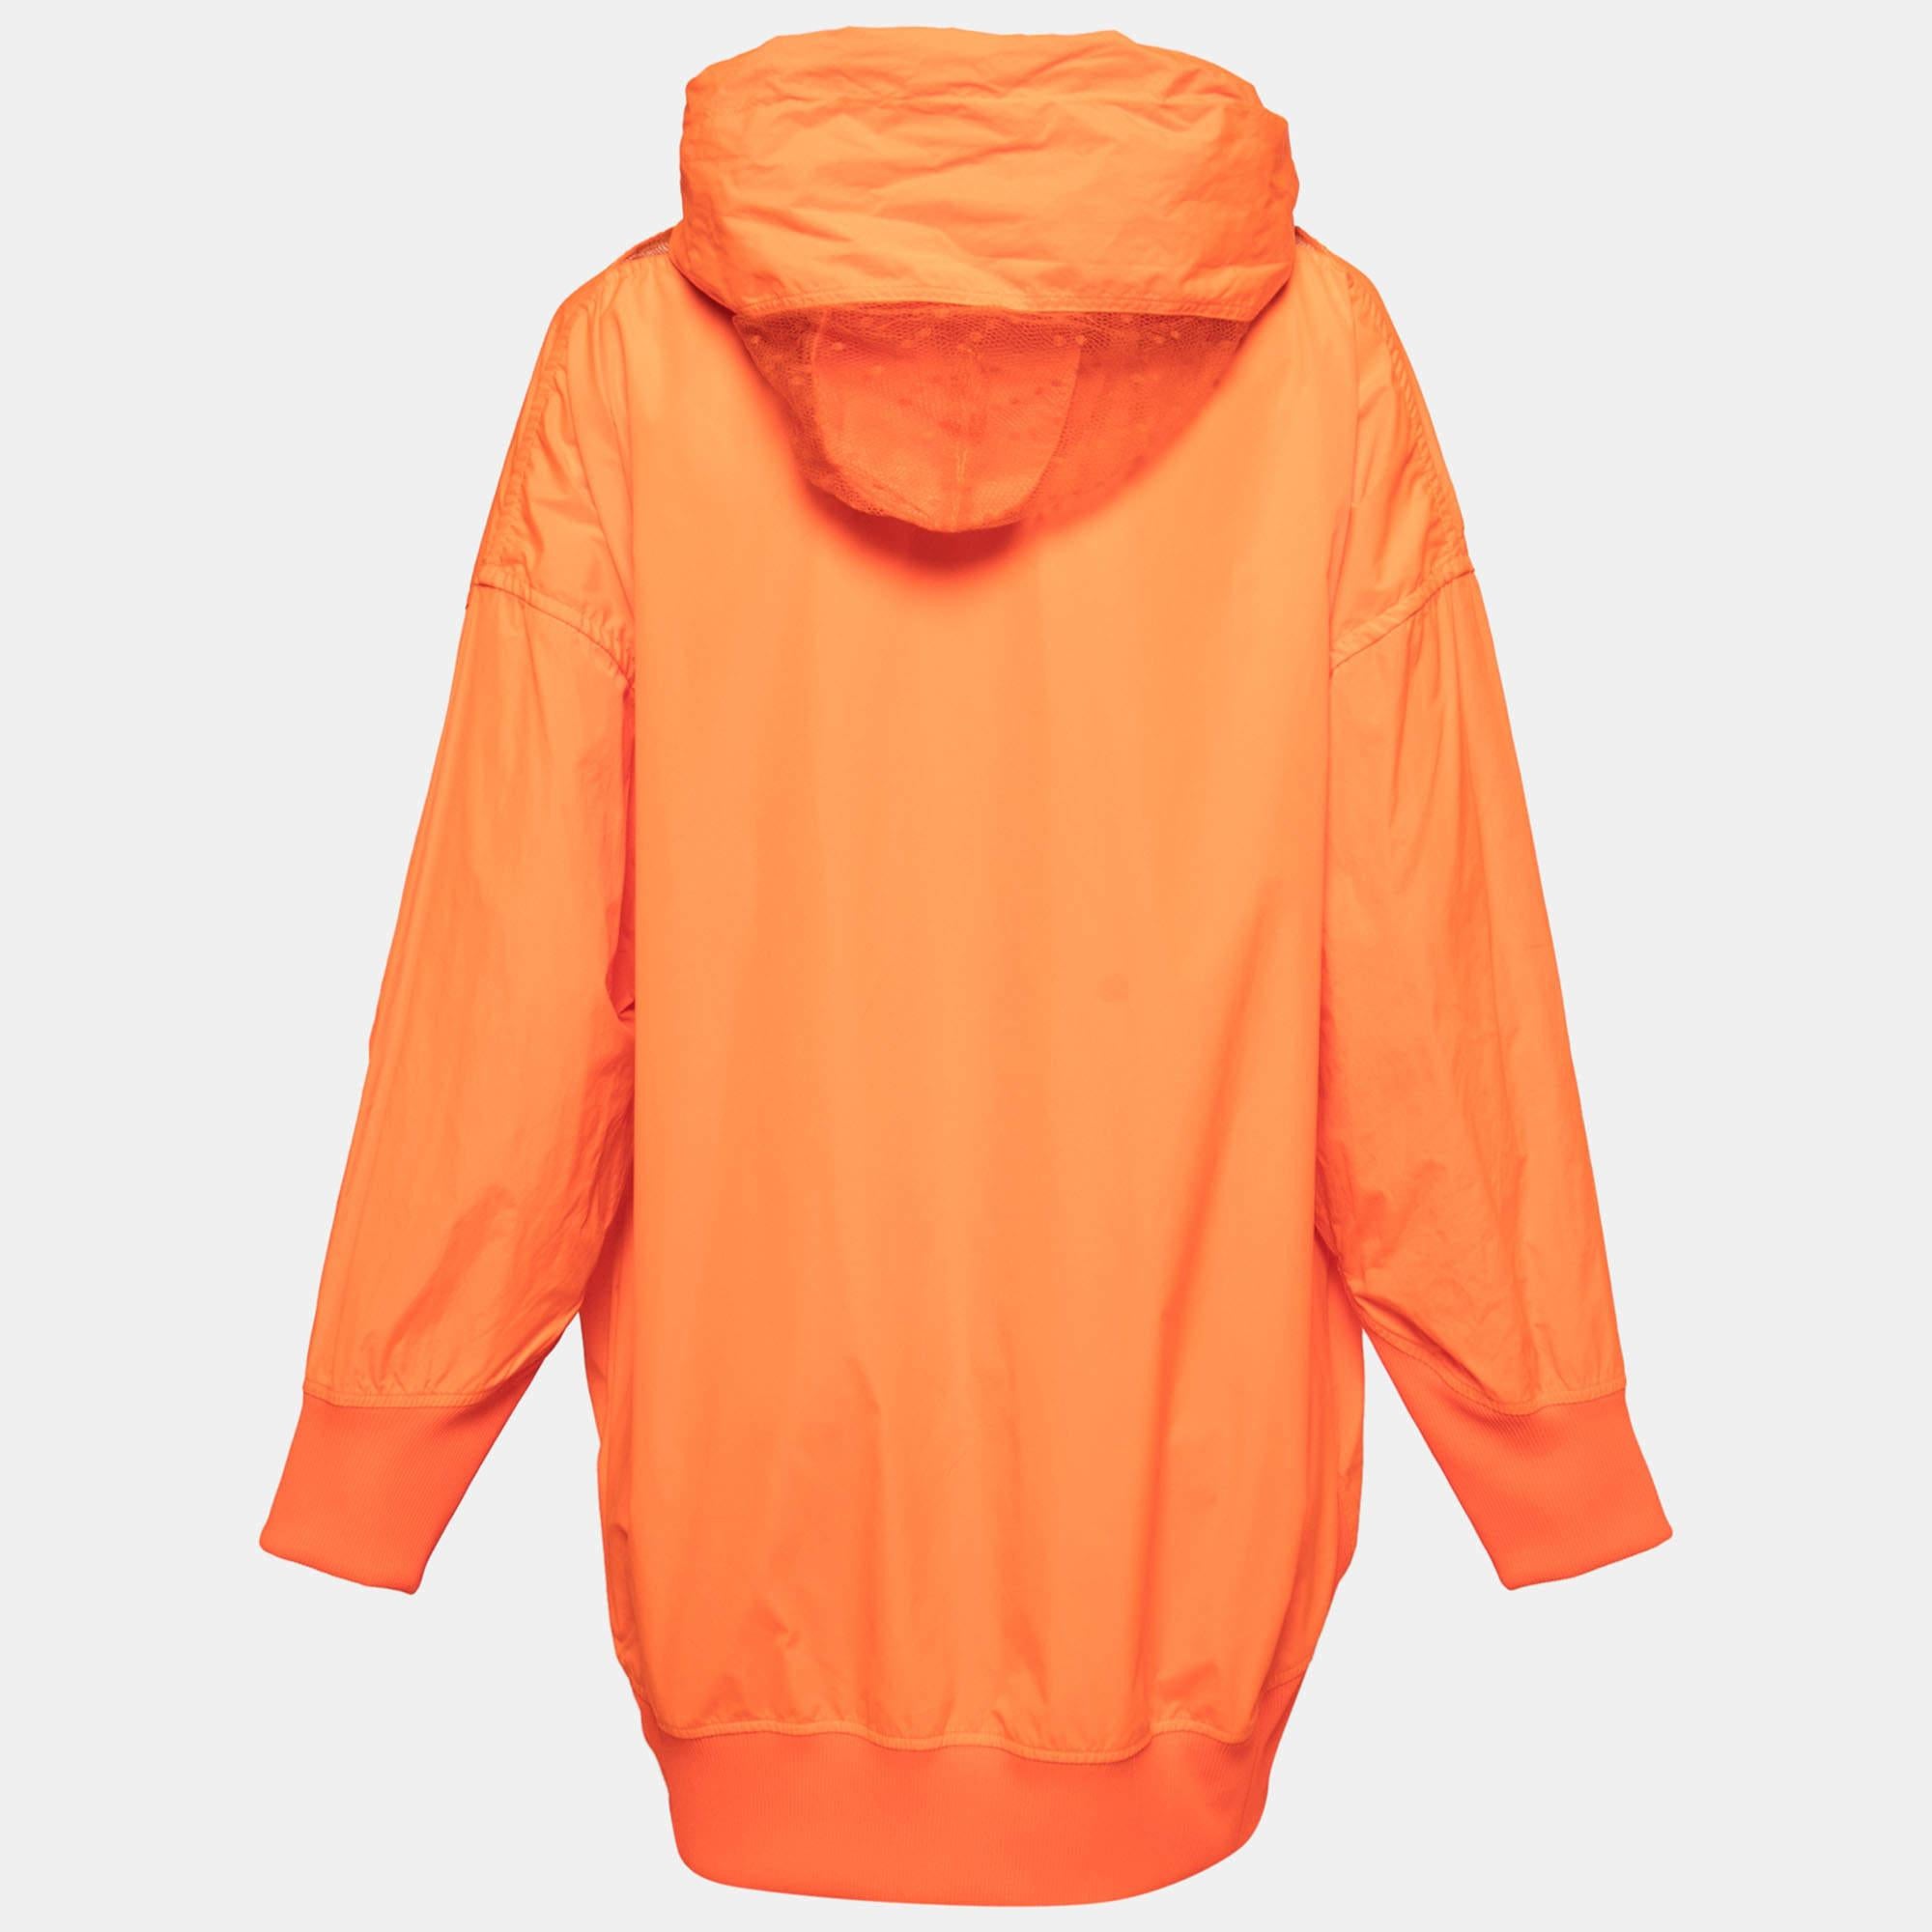 The RED Valentino Neon Orange Taffeta Zip Front Hooded Coat is a vibrant and stylish outerwear piece. Made from taffeta fabric, it features a zip front closure and a hood for added functionality. With its eye-catching neon orange color, this coat is